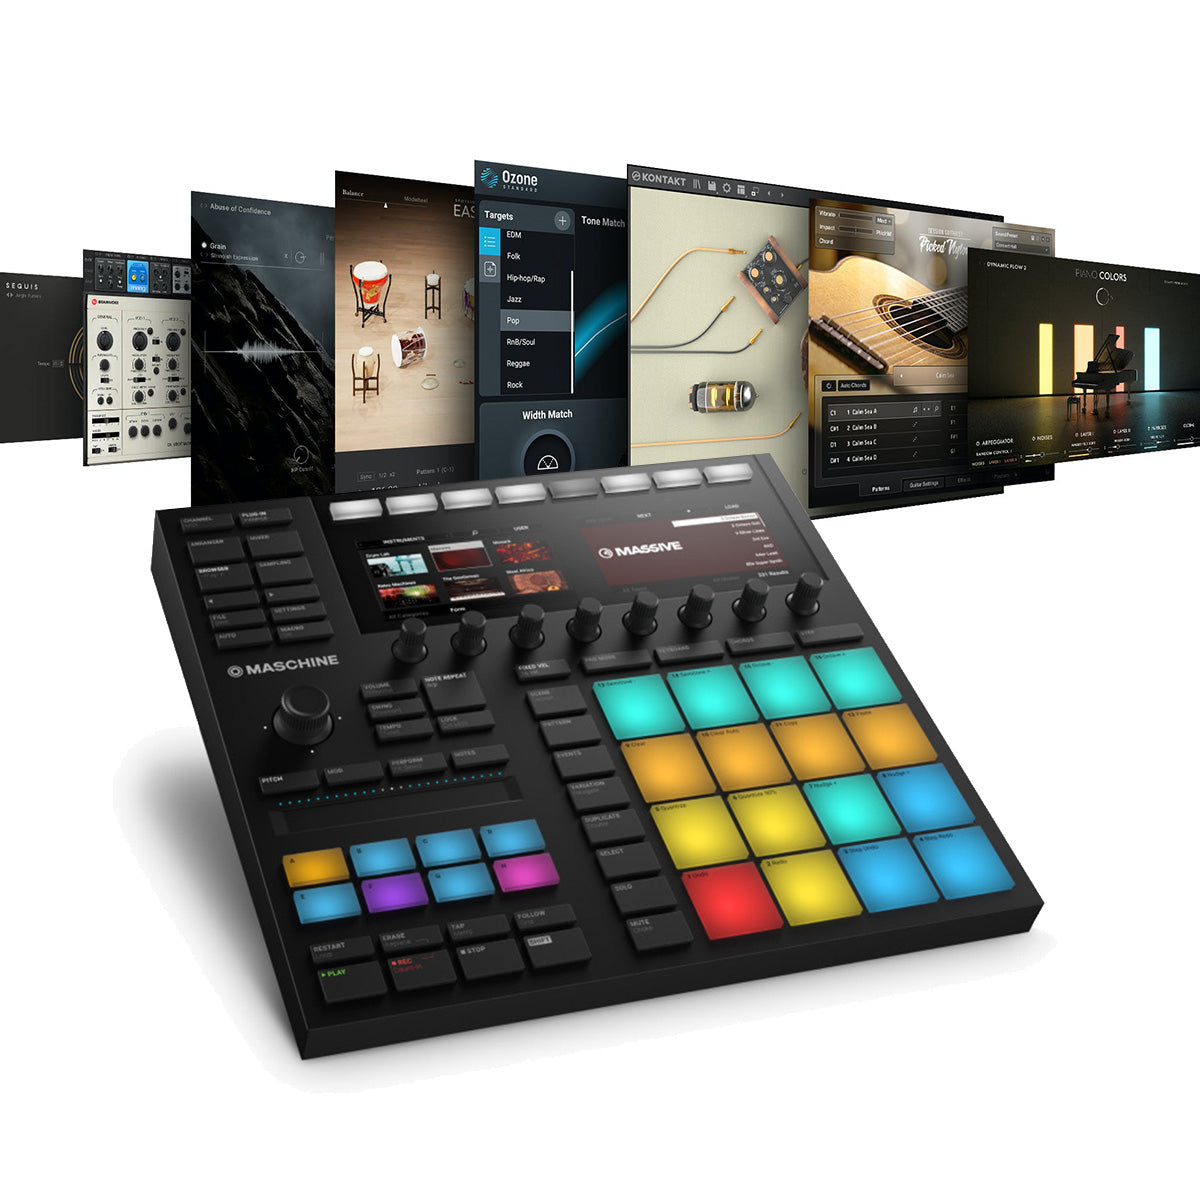 Native Instruments Maschine MK3 with Komplete 14 Ultimate